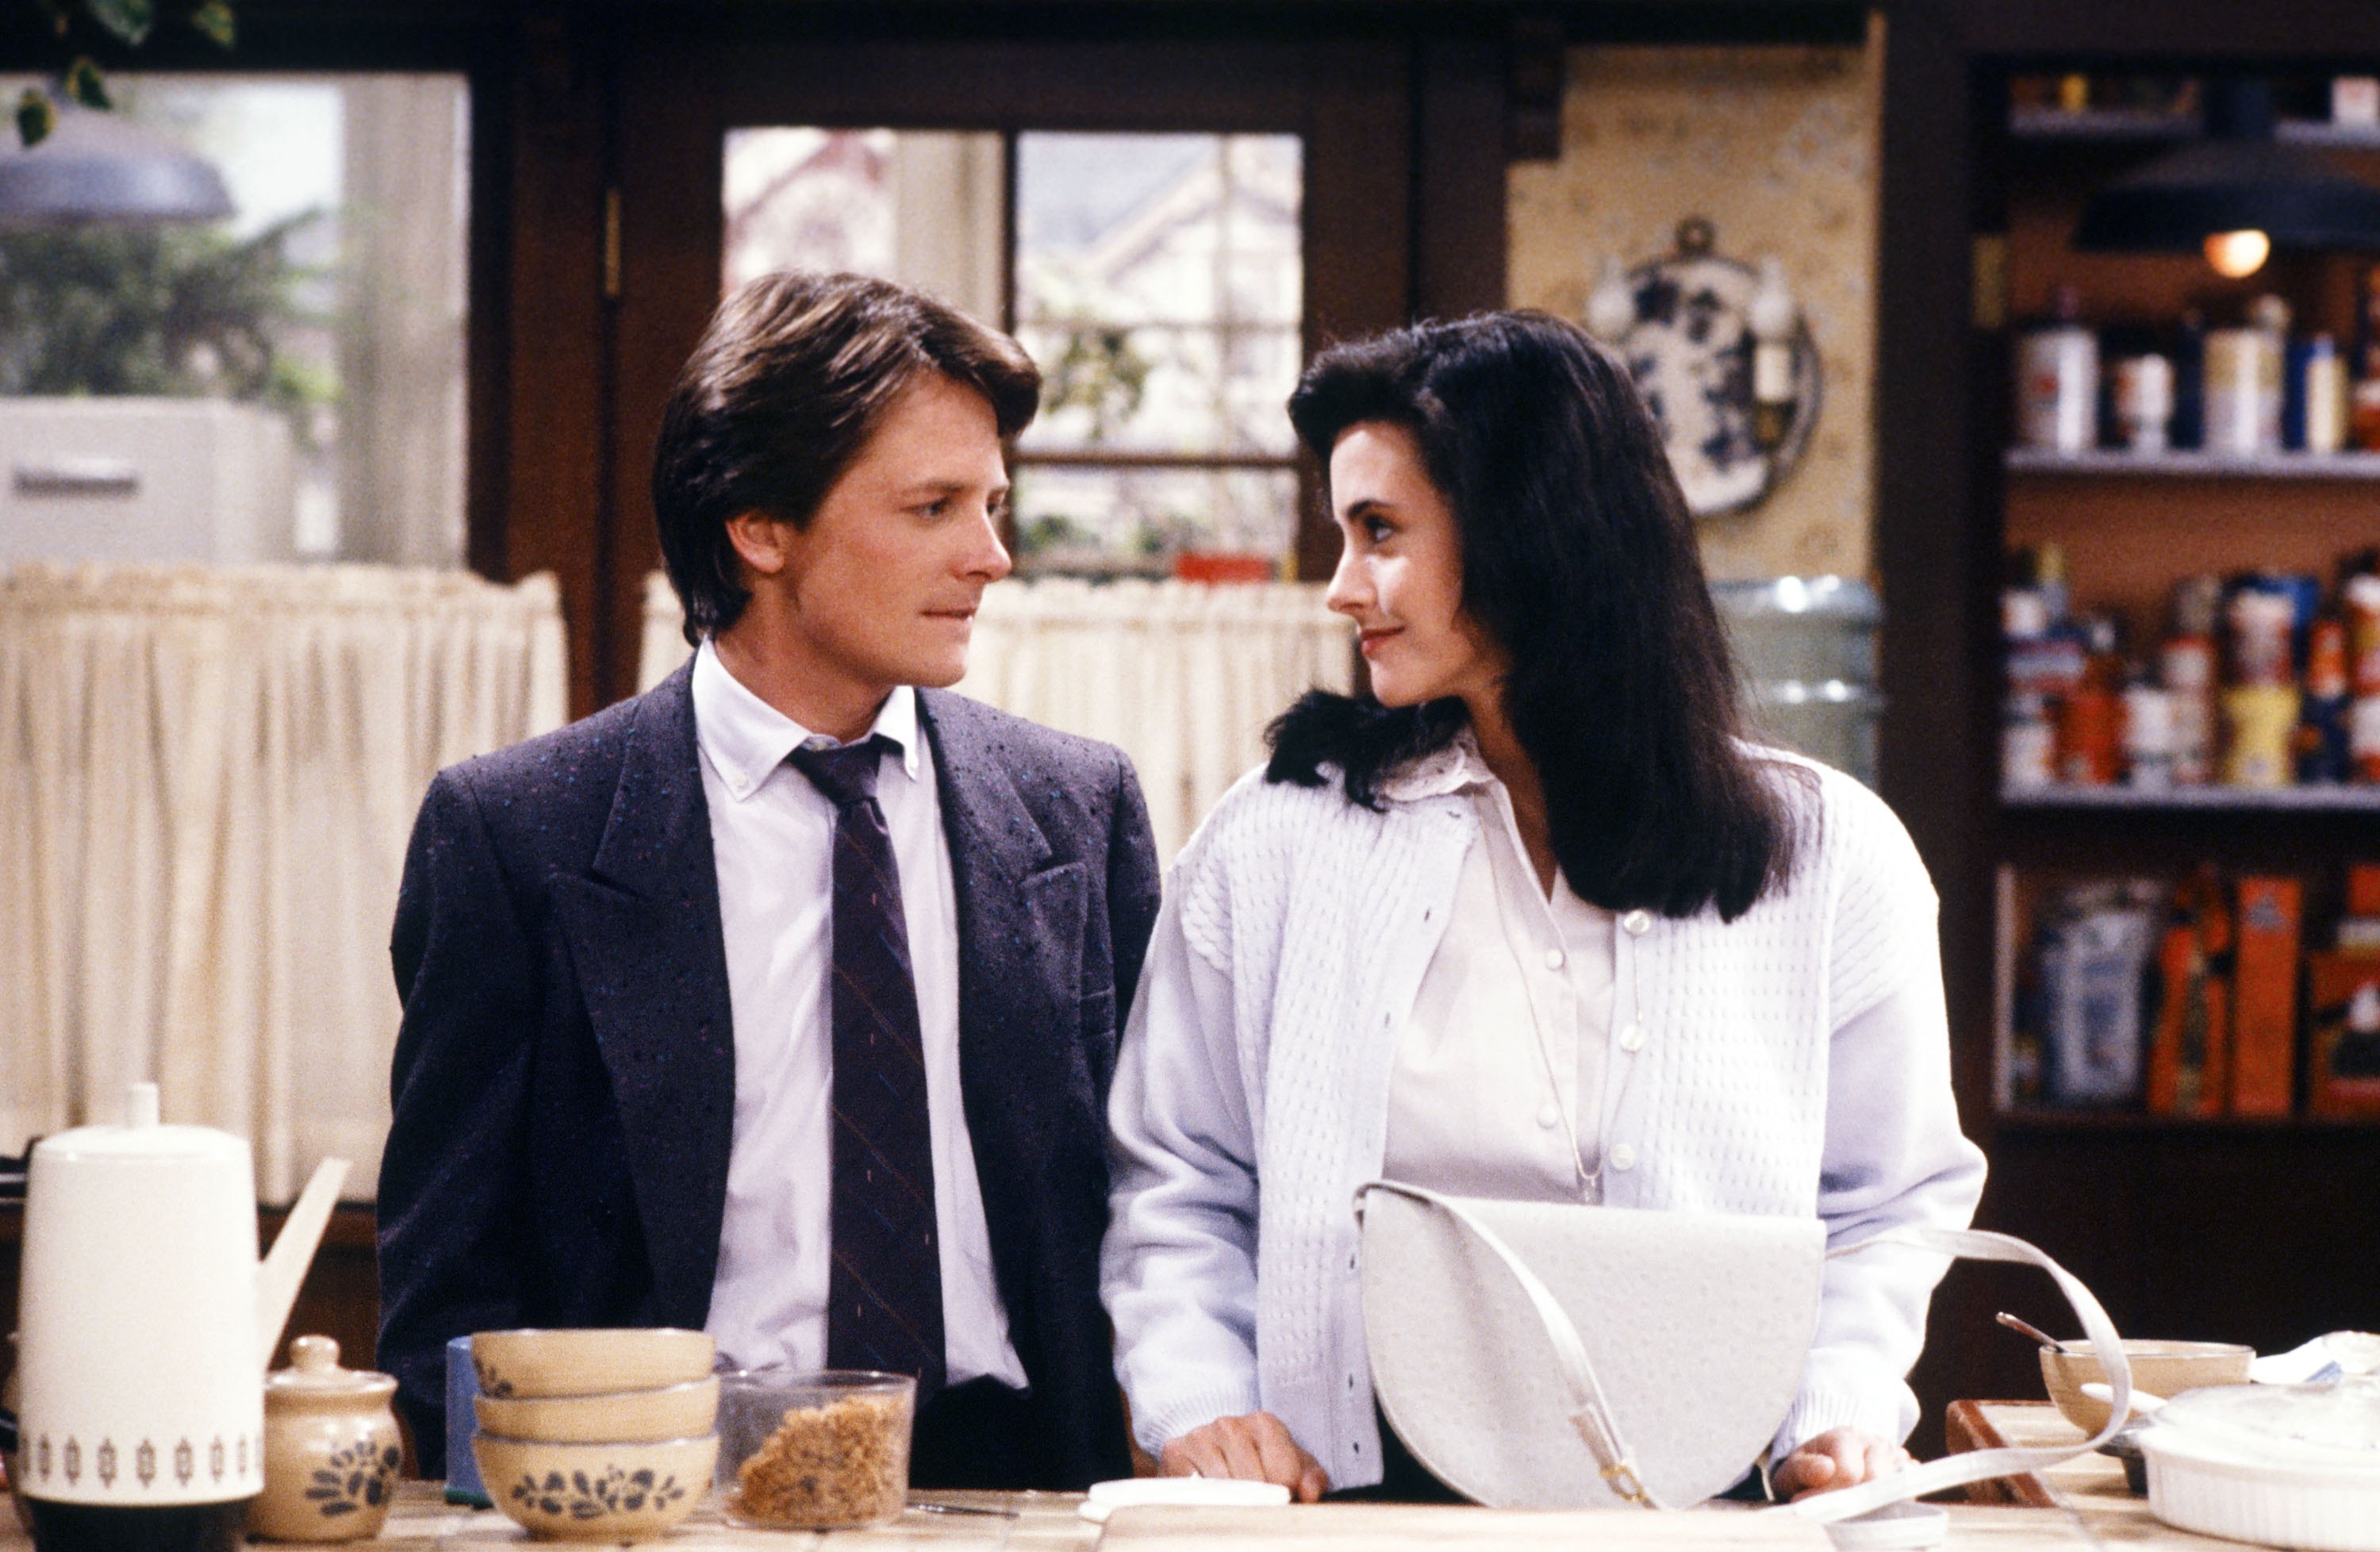 Still of Michael J. Fox and Courteney Cox in Family Ties (1982)